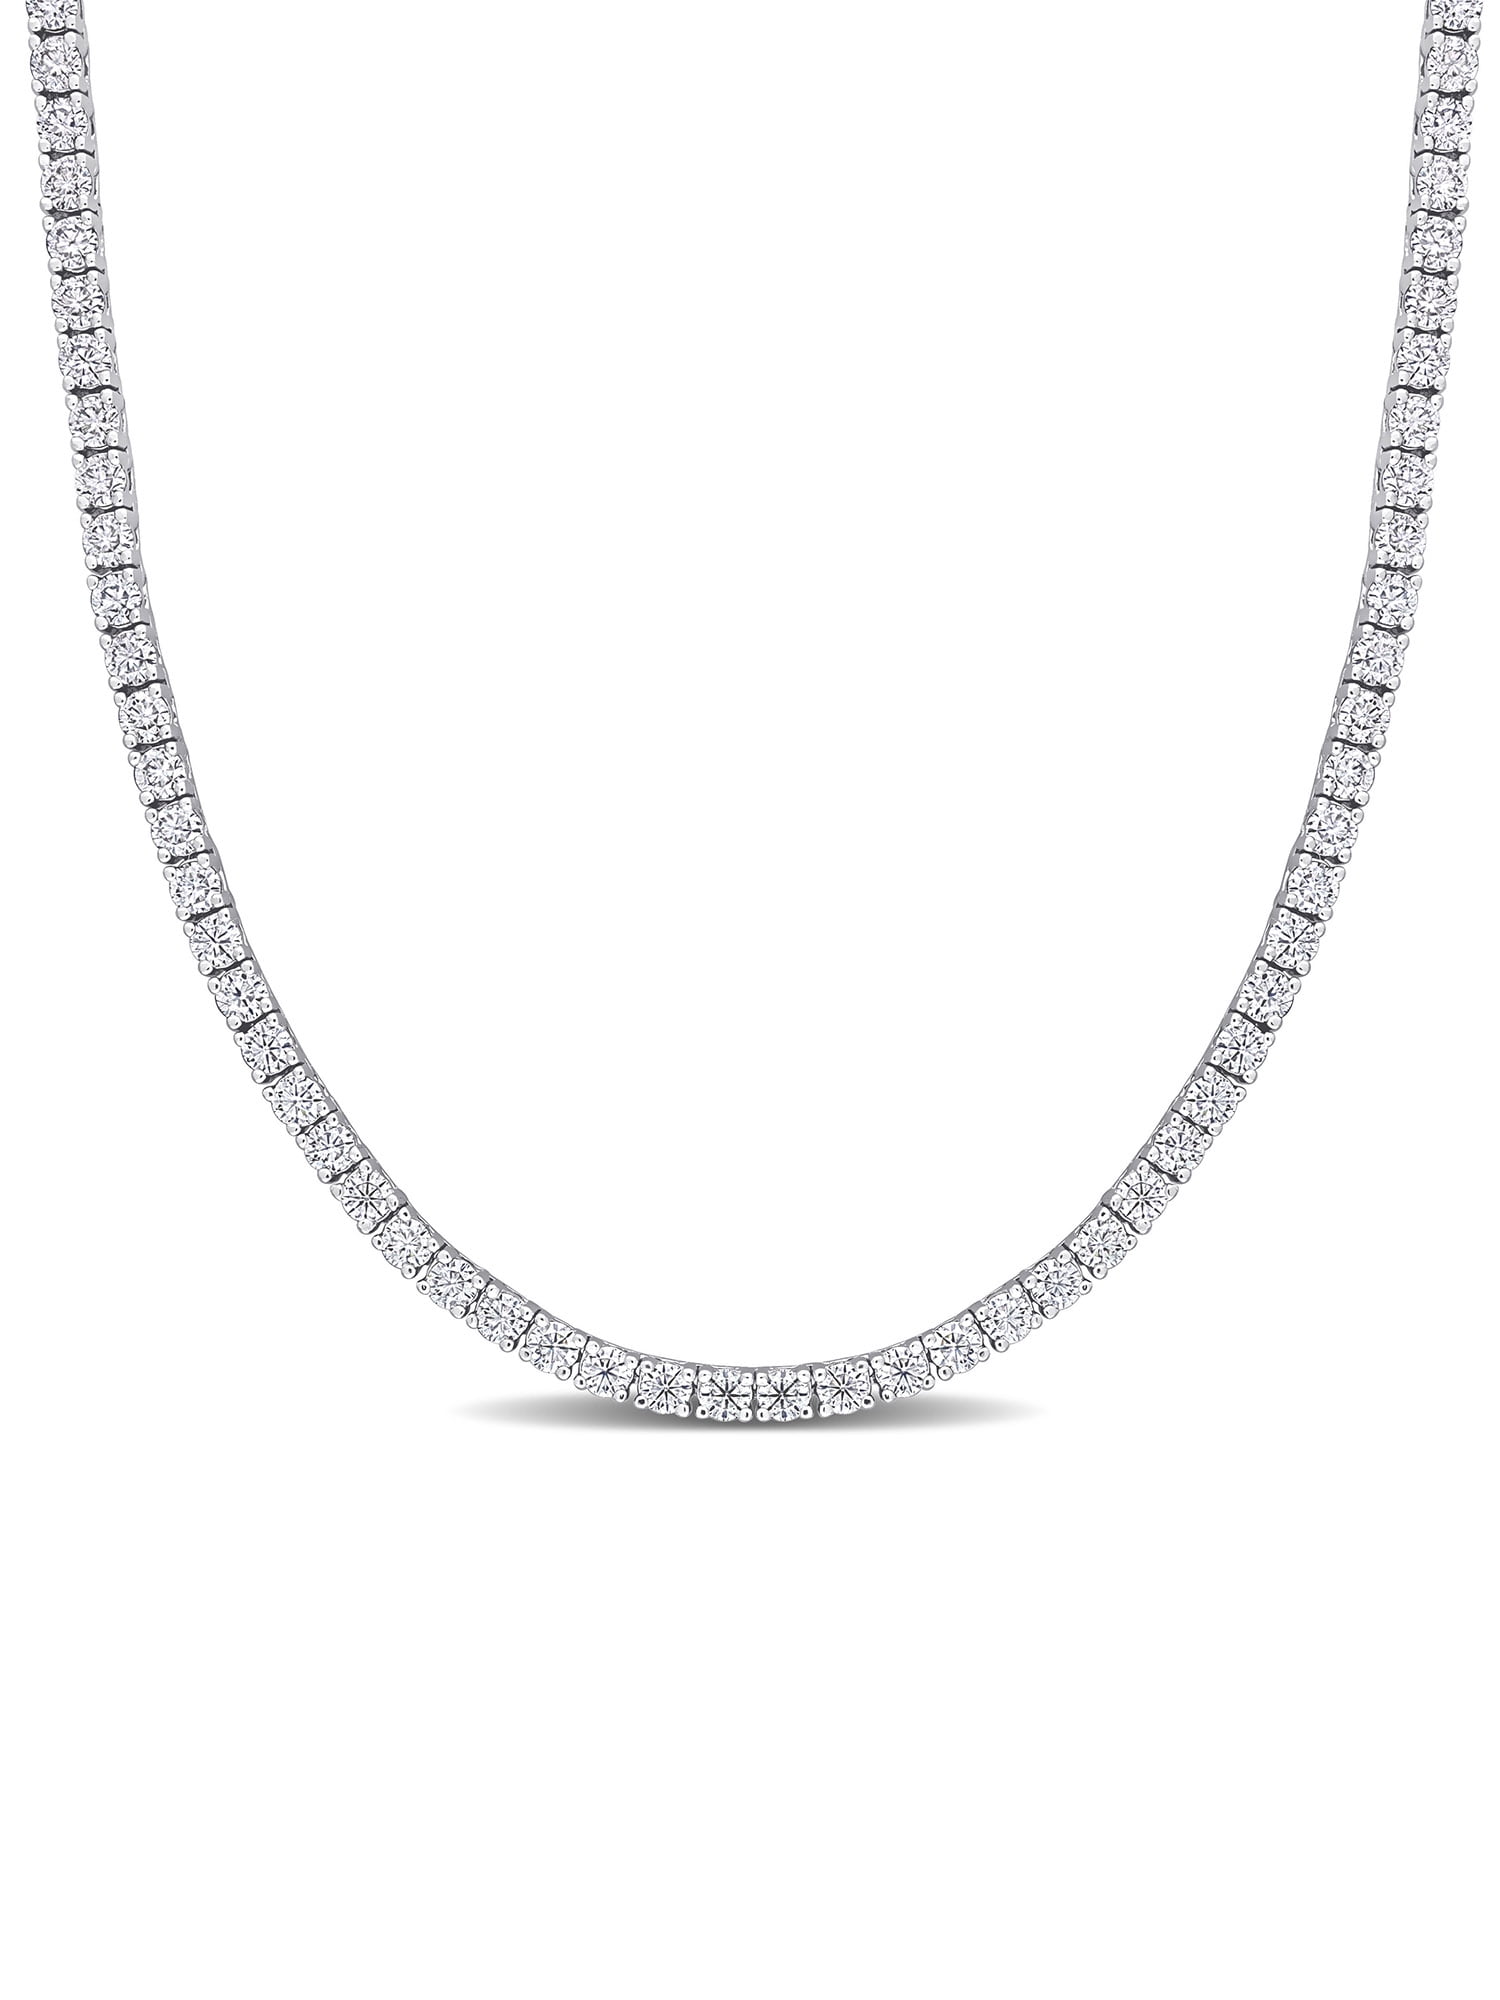 Diamond Jewelry - 2-Piece Set of 1 1/2 CT TDW Diamond S-LinK Tennis Necklace  & Bracelet in Sterling Silver - Discounts for Veterans, VA employees and  their families! | Veterans Canteen Service